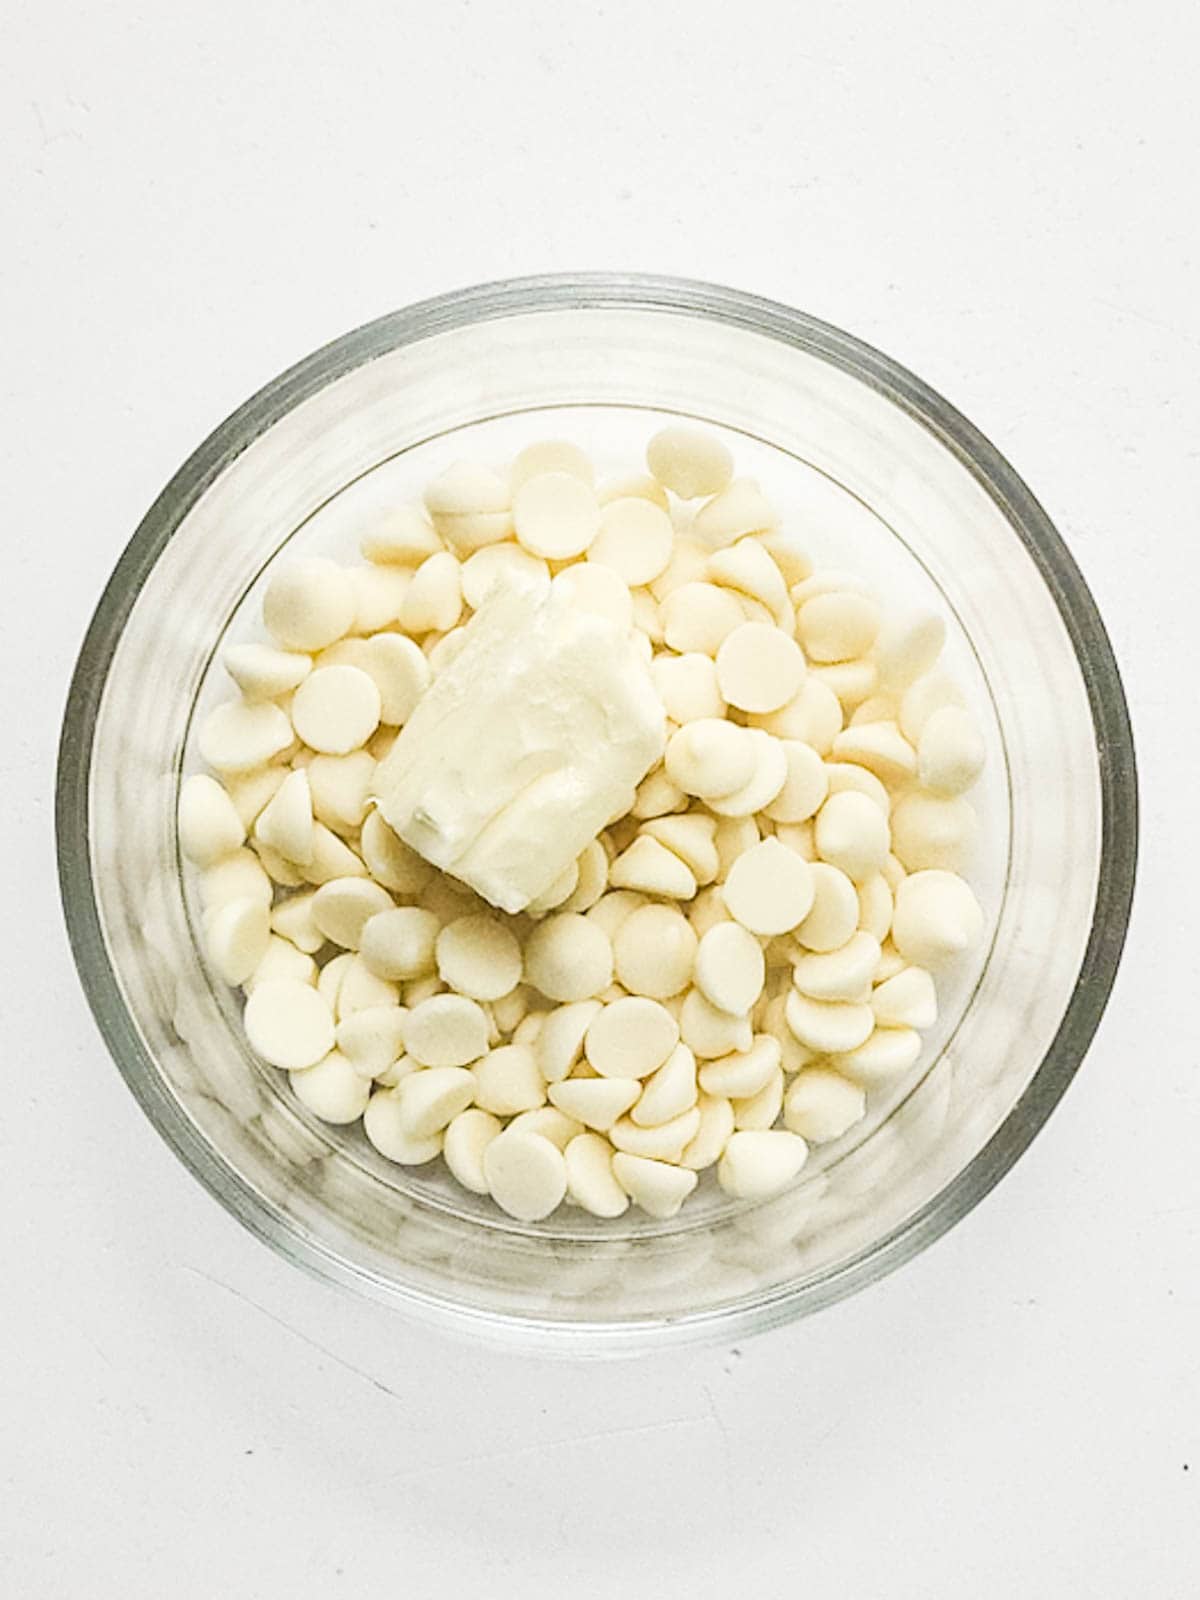 White chocolate chips and butter in a glass mixing bowl.